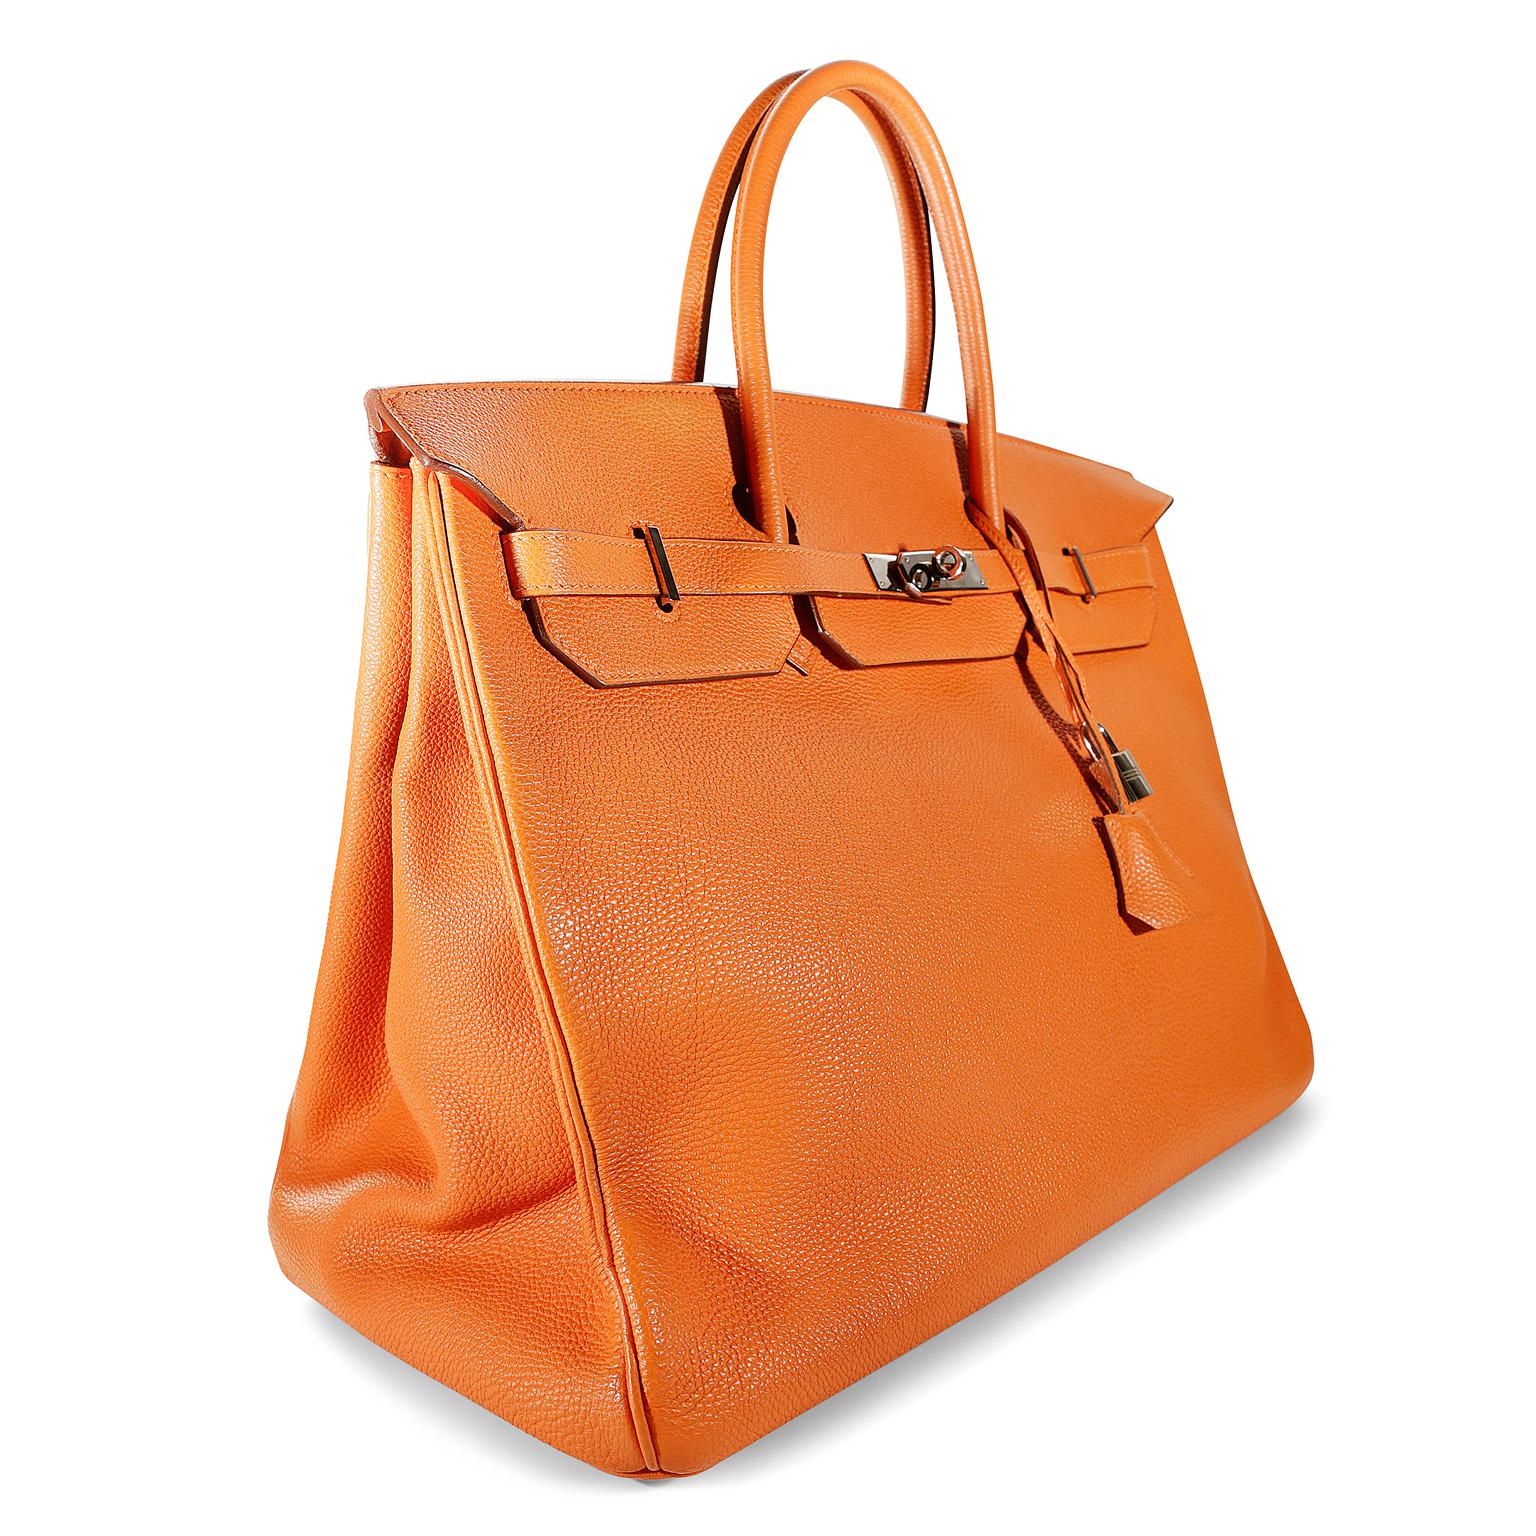 Hermès Orange Togo 40 cm Birkin- excellent condition
Hand stitched by skilled craftsmen, wait lists of a year or more are common for the Hermès Birkin. They are considered the ultimate in luxury fashion. Iconic Orange paired with Palladium hardware